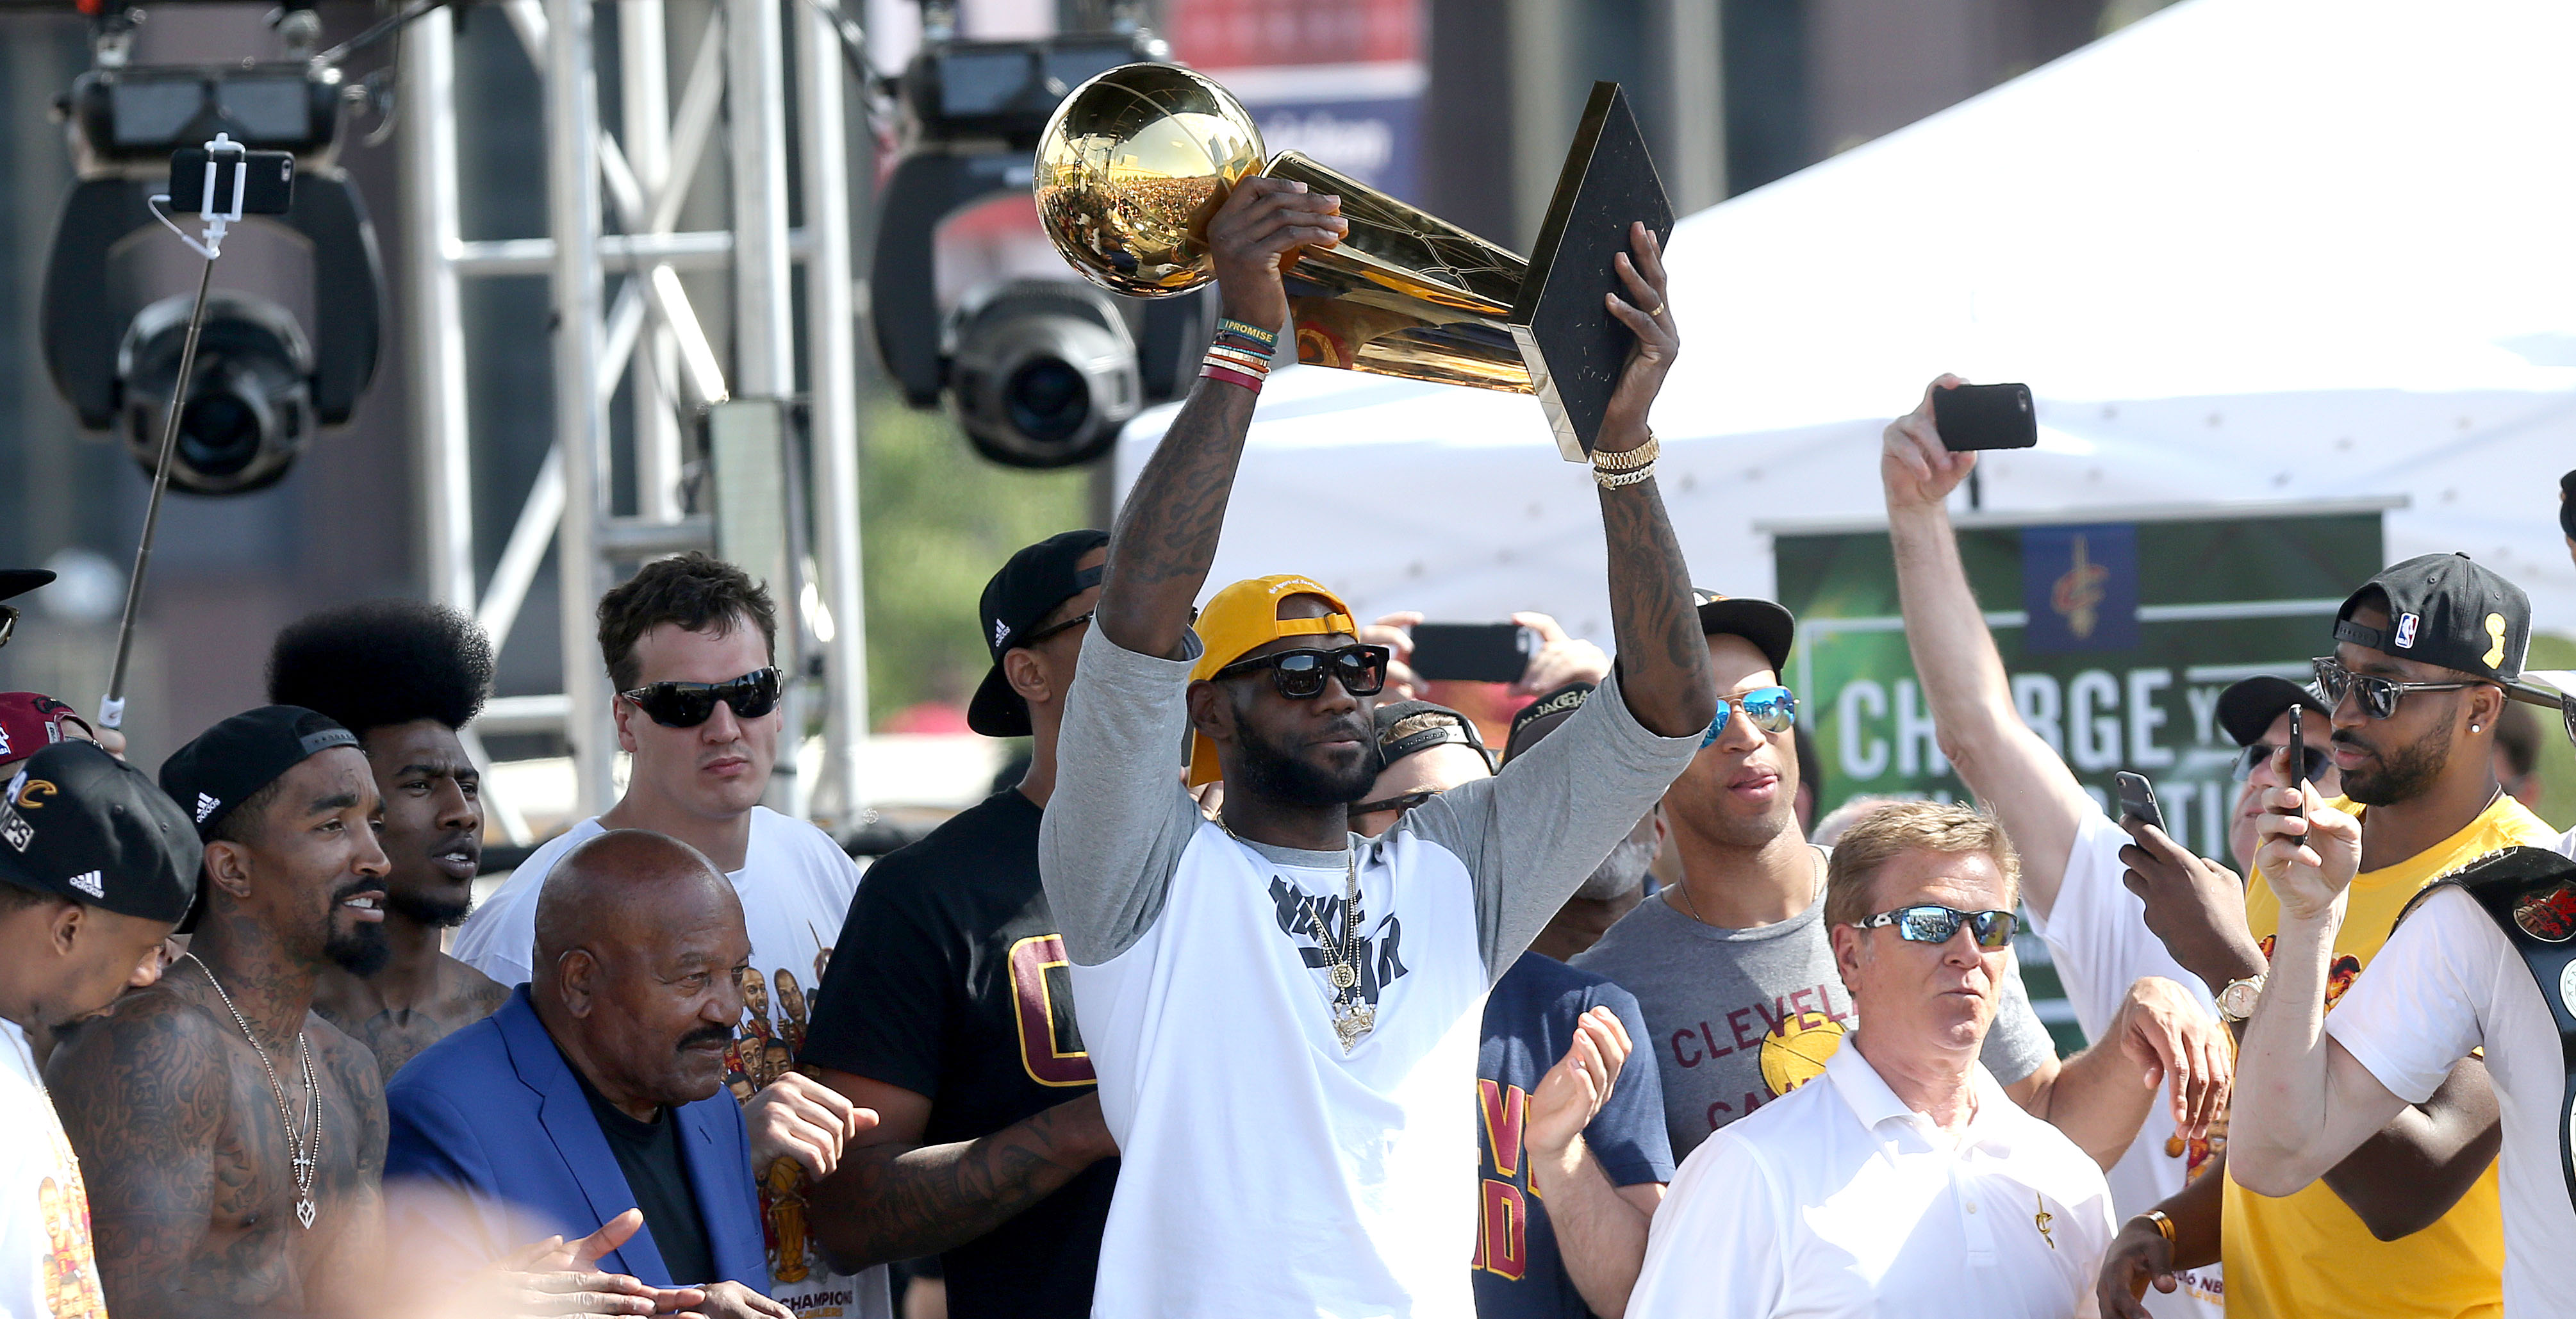 Cleveland Cavaliers forward LeBron James hoists the  Larry O'Brien trophy into the air after having it handed to him by Jim Brown at a rally to celebrate and honor the 2016 NBA Champion Cleveland Cavaliers.    Joshua Gunter, cleveland.com June 22, 2016. Cleveland. 